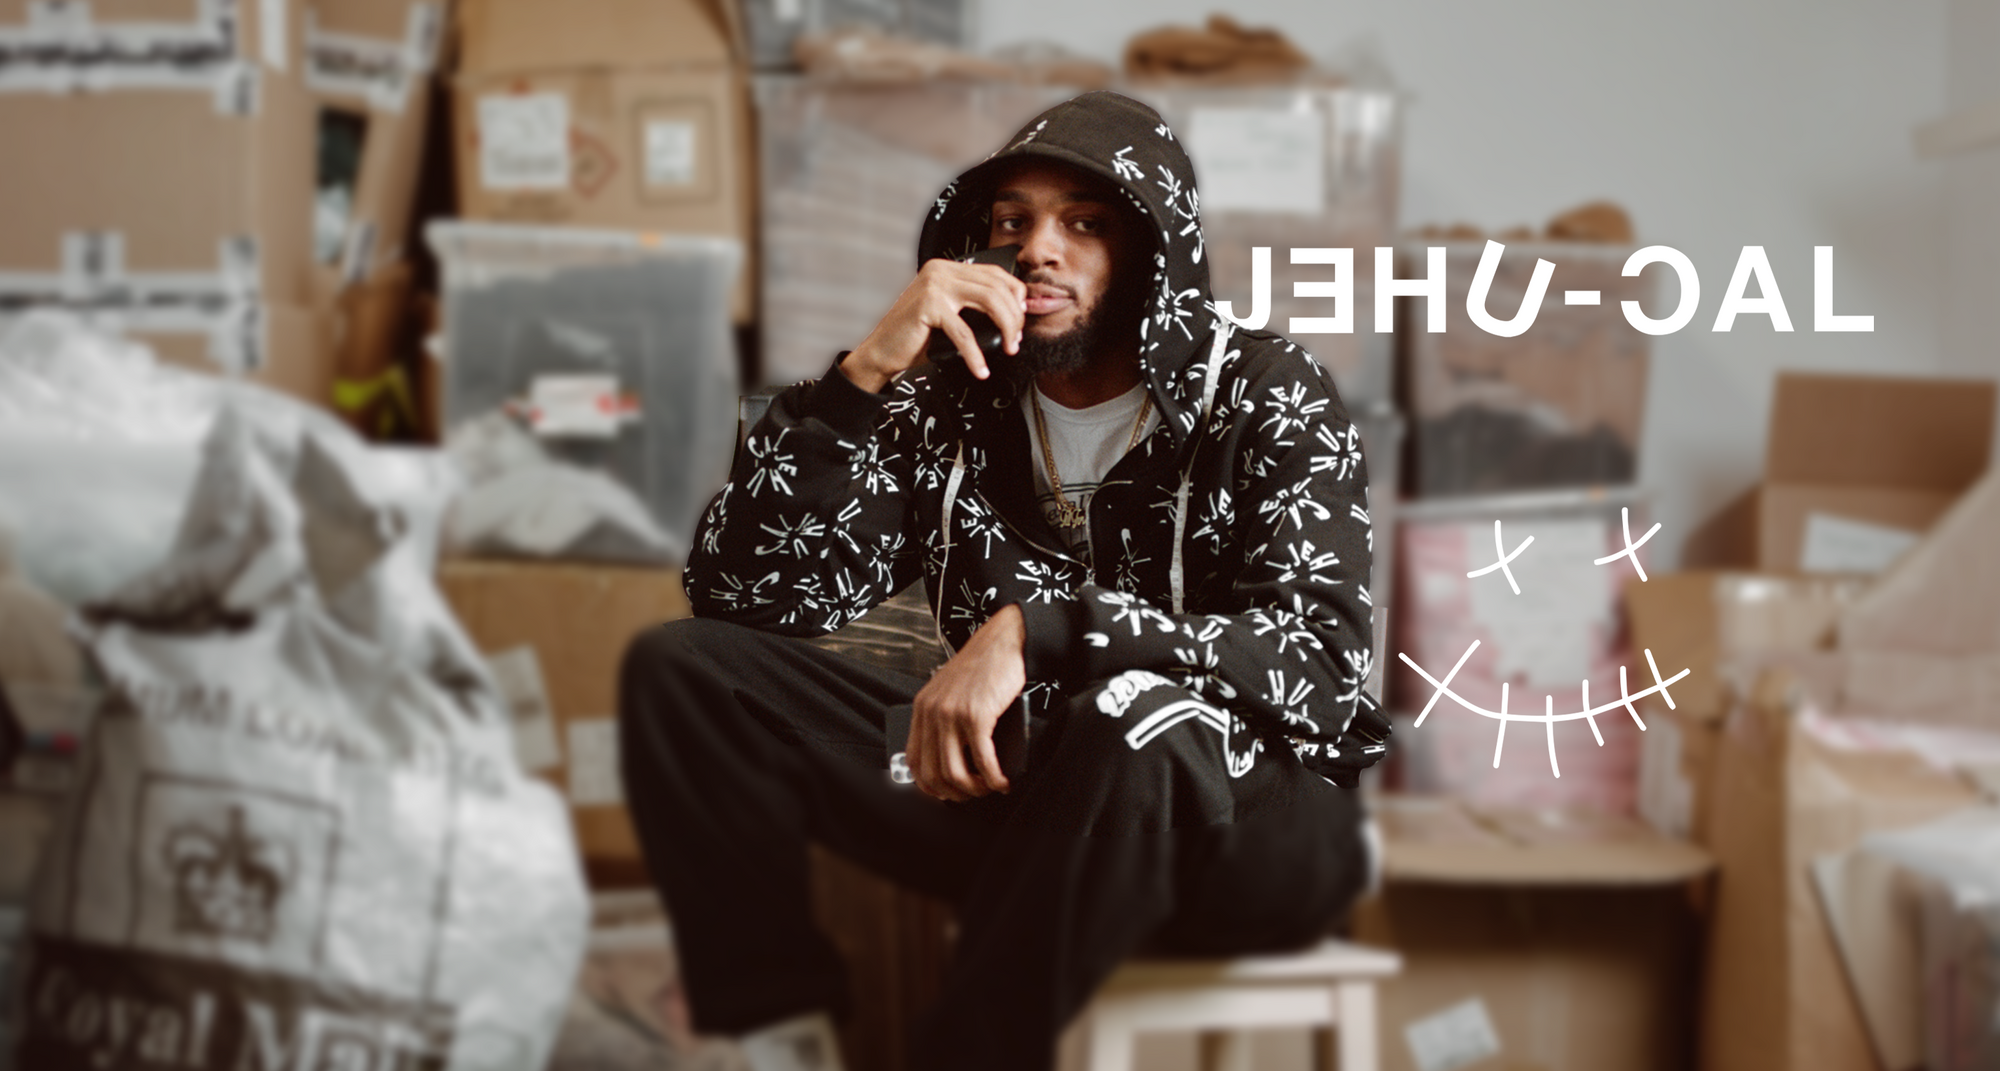 Emay Enemokwu Discusses Jehucal, Starting Your Own Brand and How to Overcome Small Talk At Events